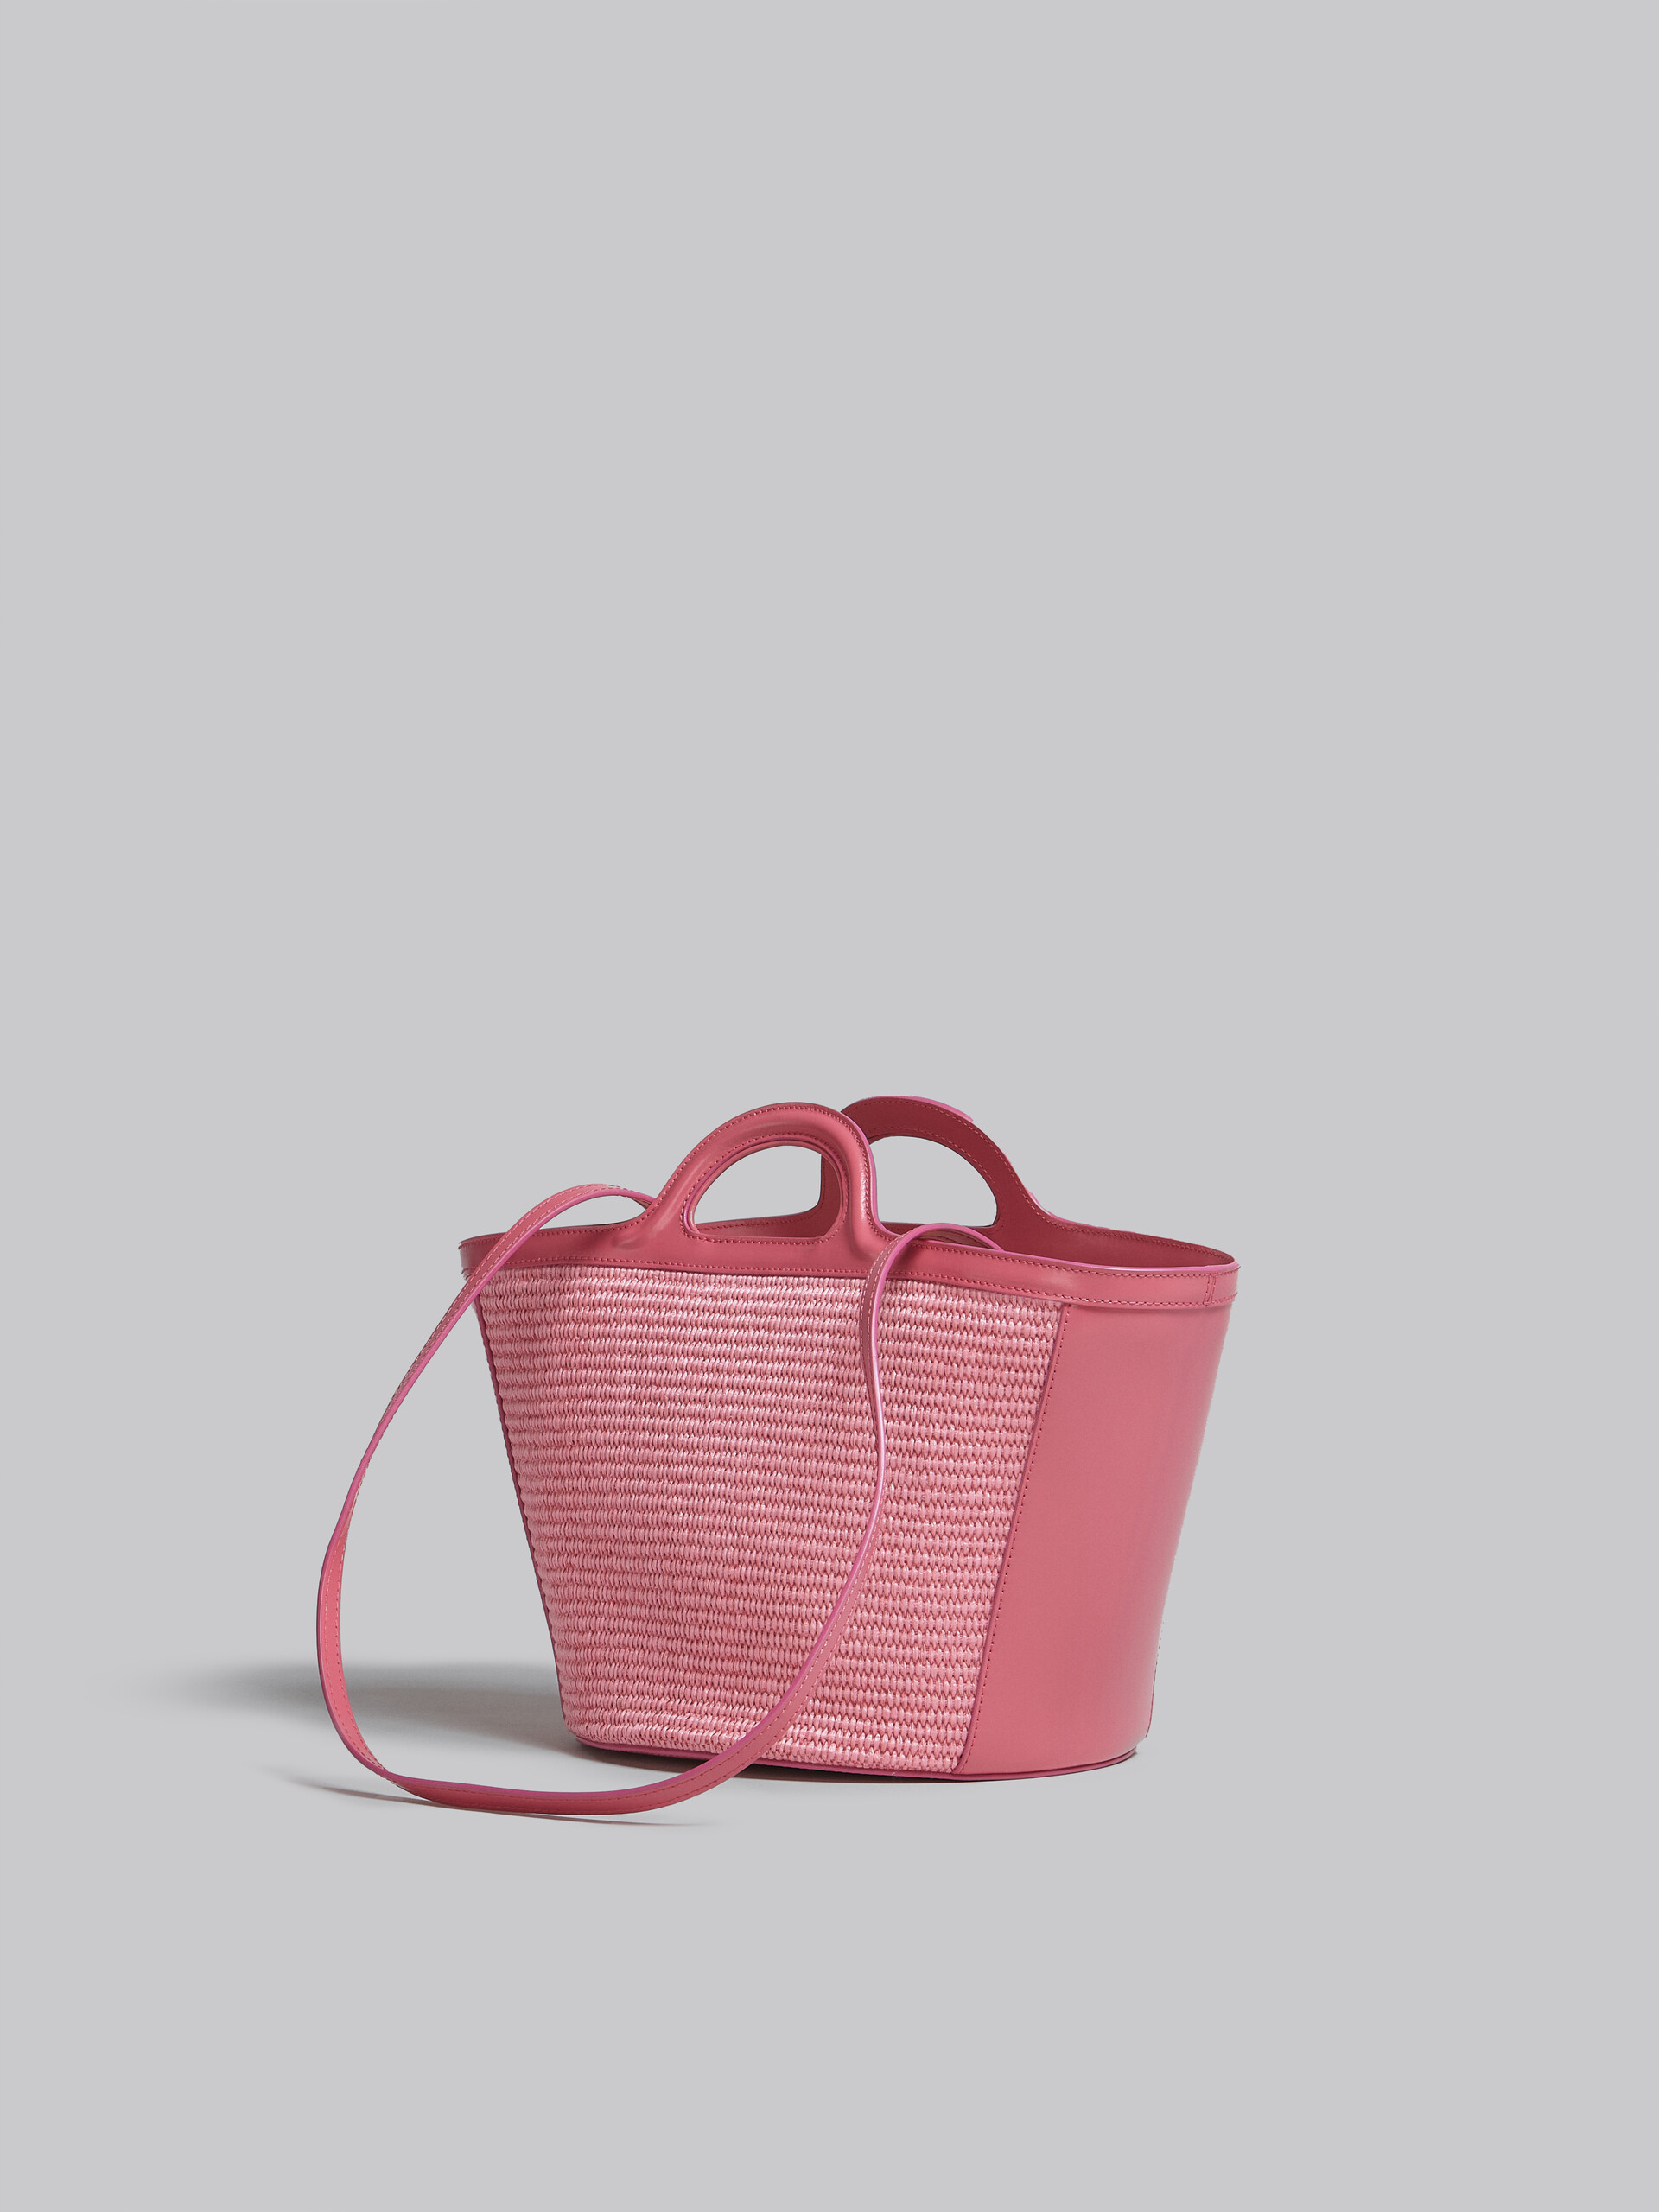 TROPICALIA small bag in pink leather and raffia - Handbags - Image 3